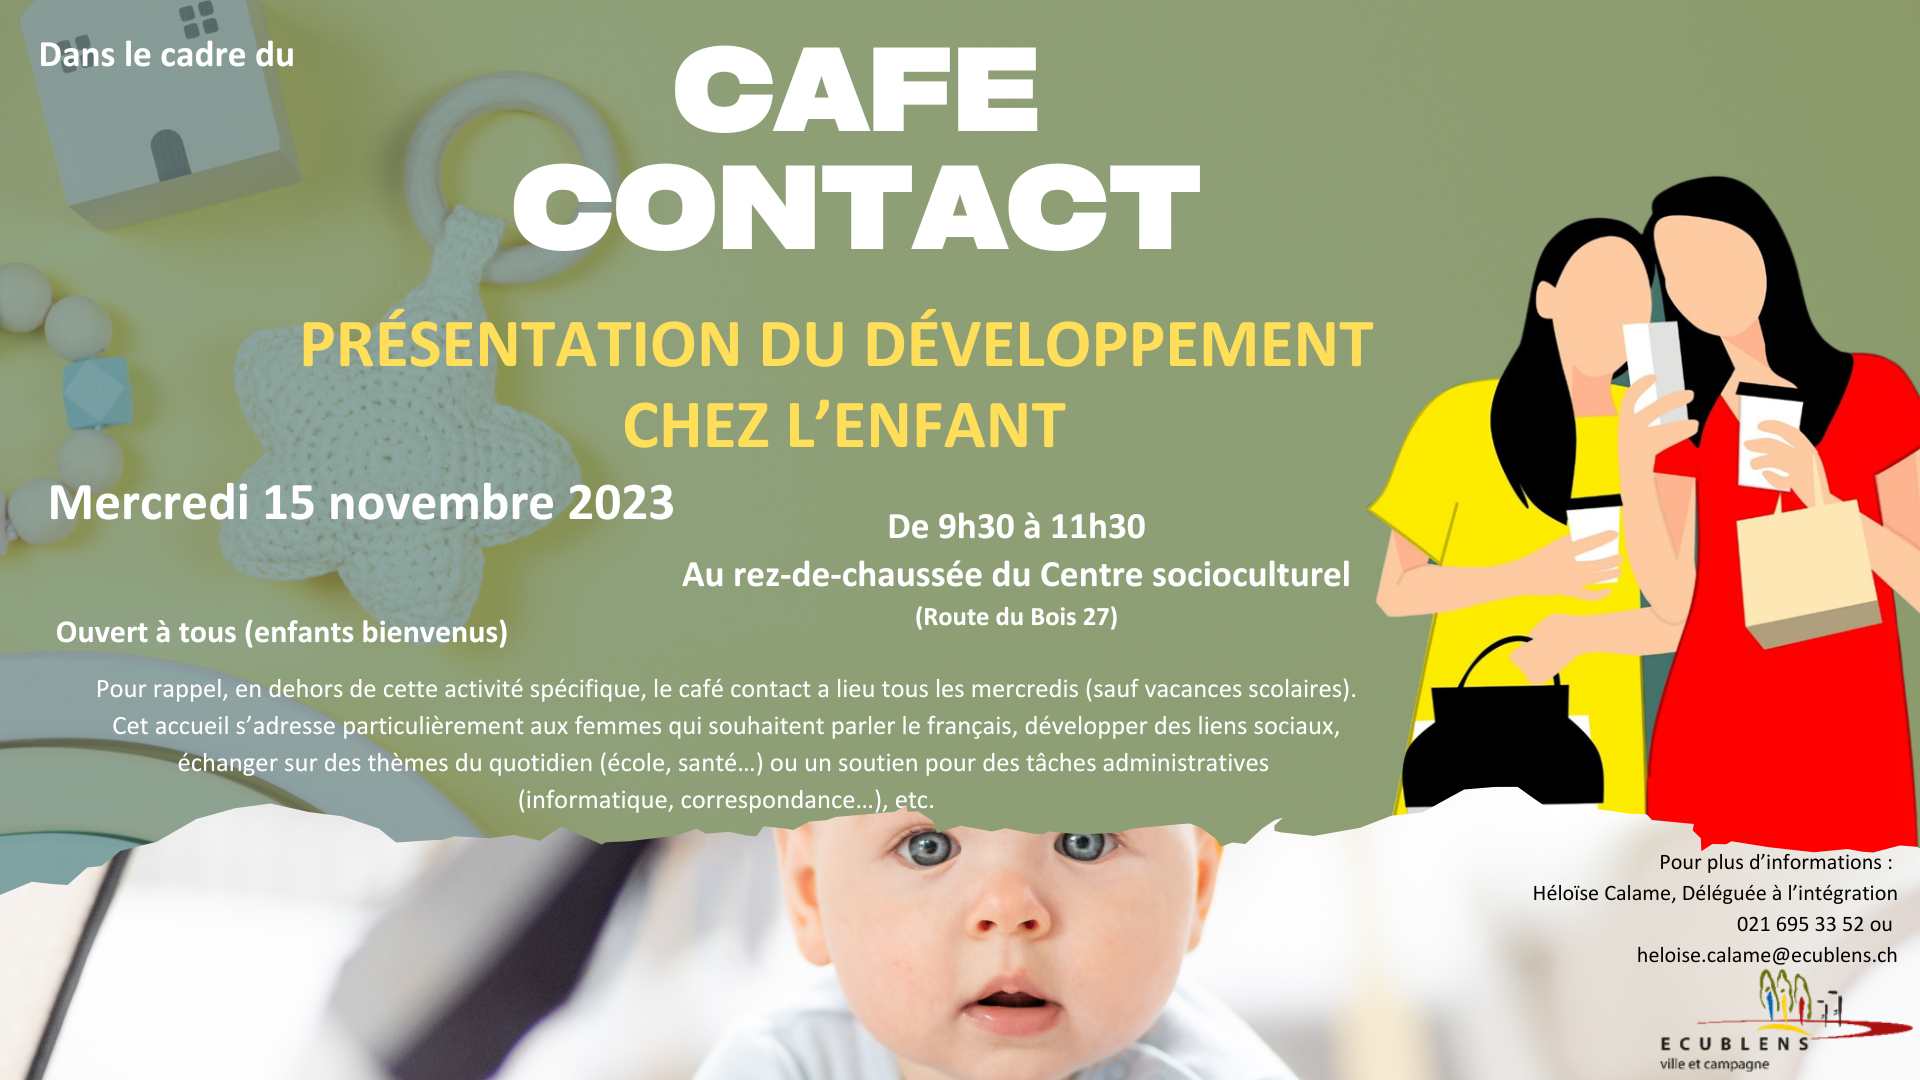 Cafe contact 2023 11 15